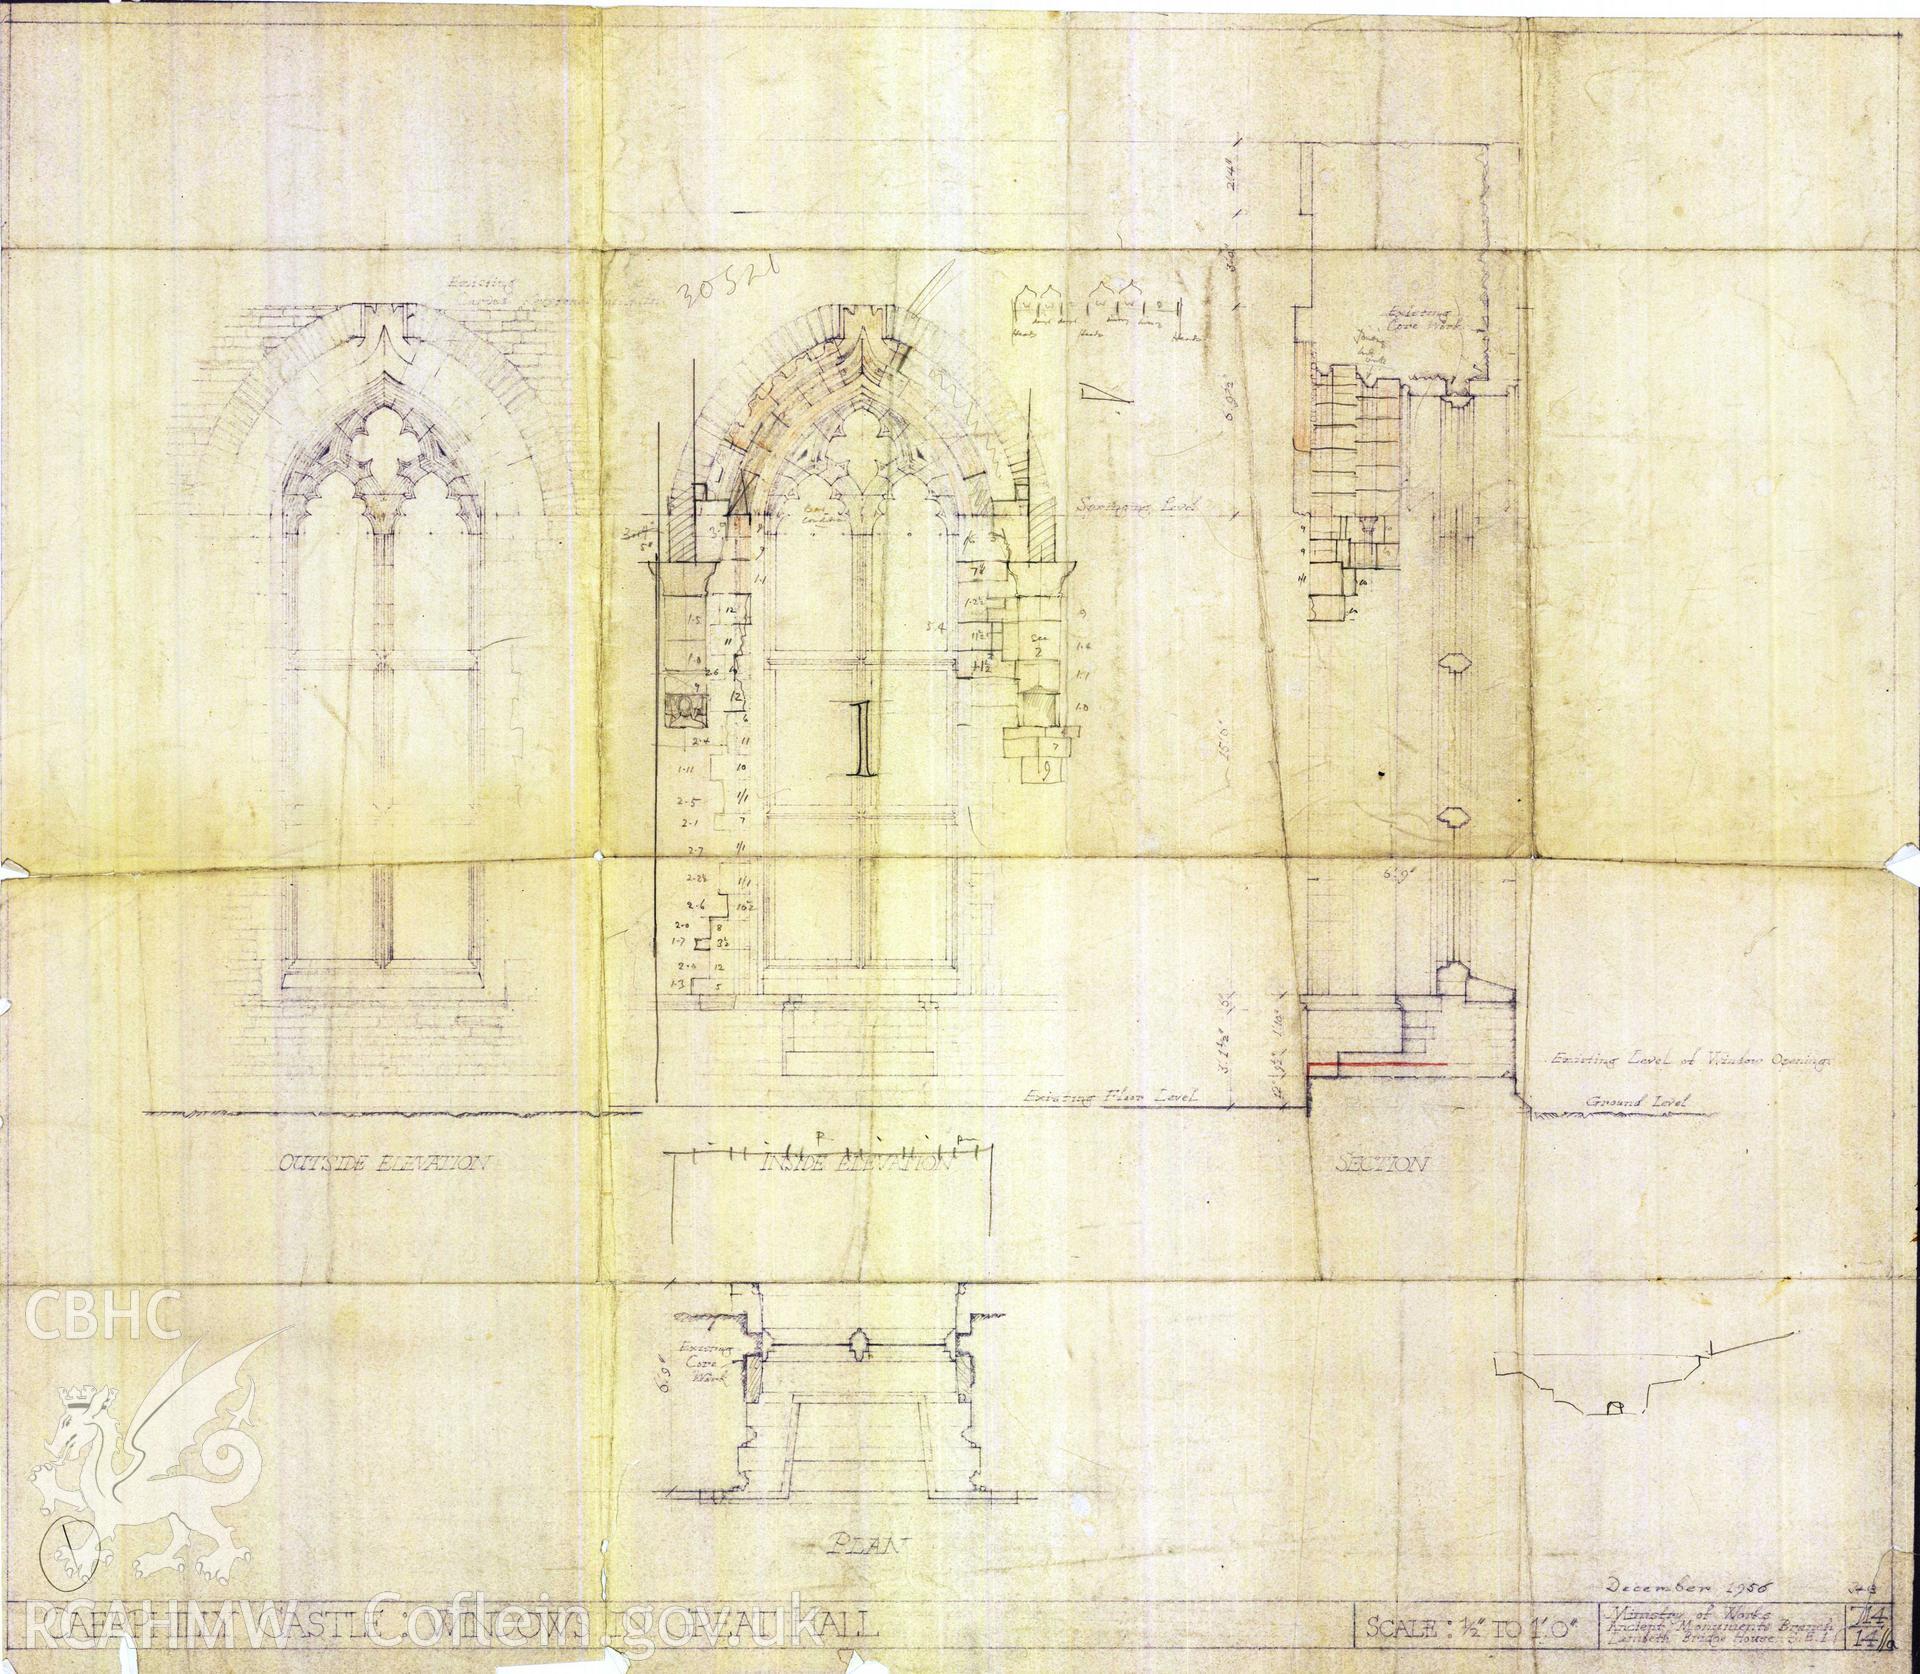 Cadw guardianship monument drawing of Caerphilly Castle. Hall, window 1, stonework+W jamb. Cadw ref. no: 714/14//a. Scale 1:24.